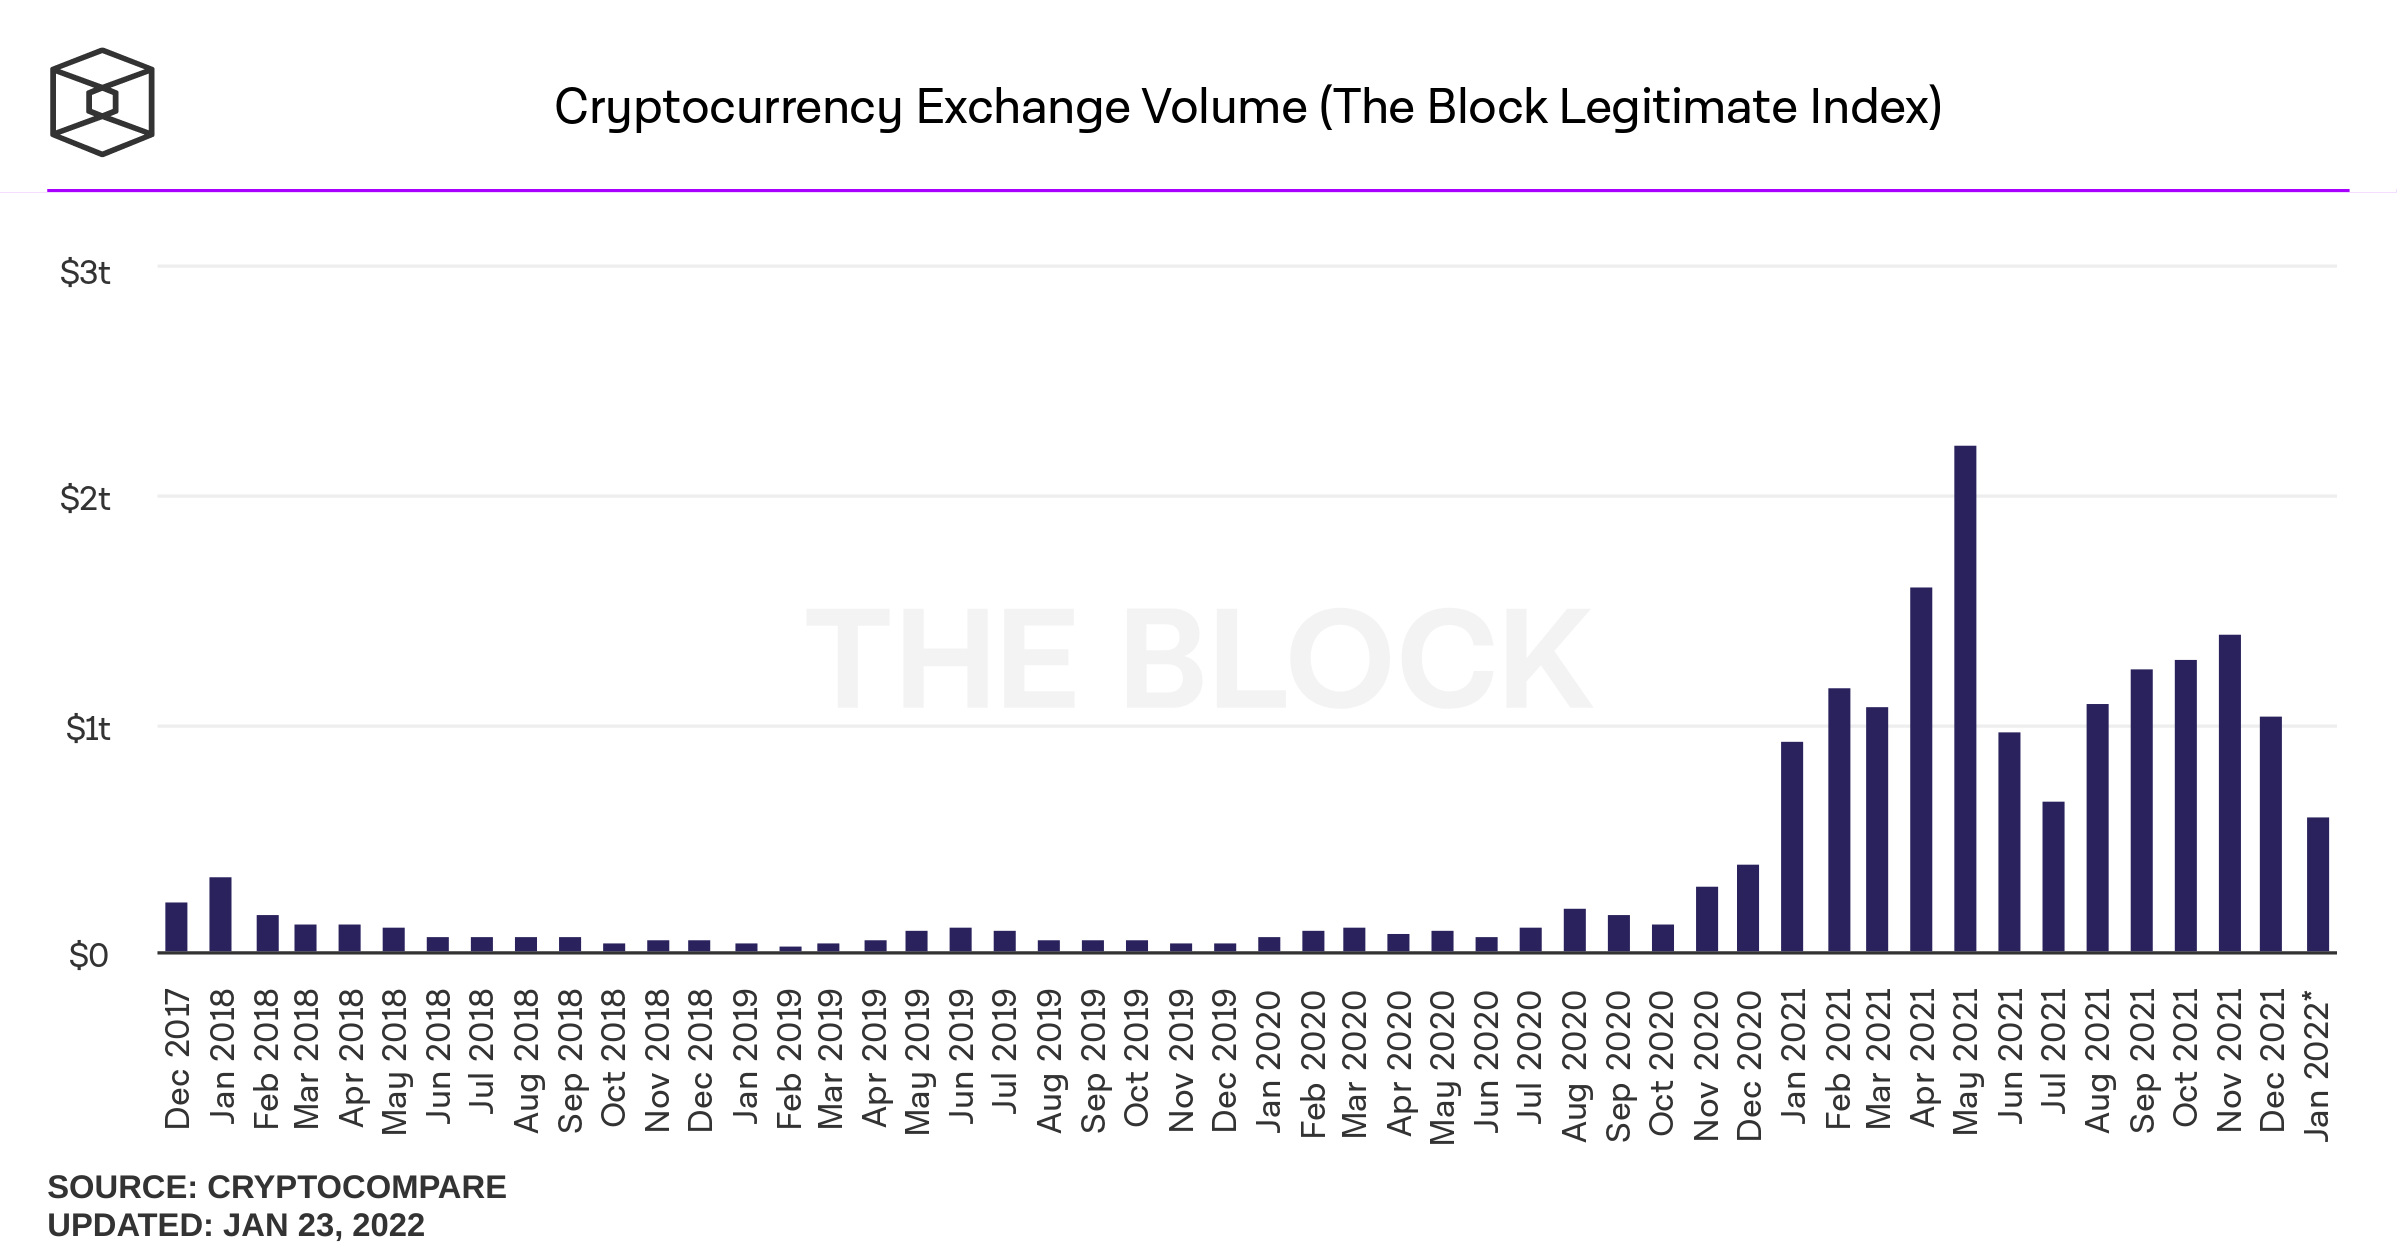 Low Volumes Across Crypto Spot Markets and Derivatives Indicate Bearish Conditions